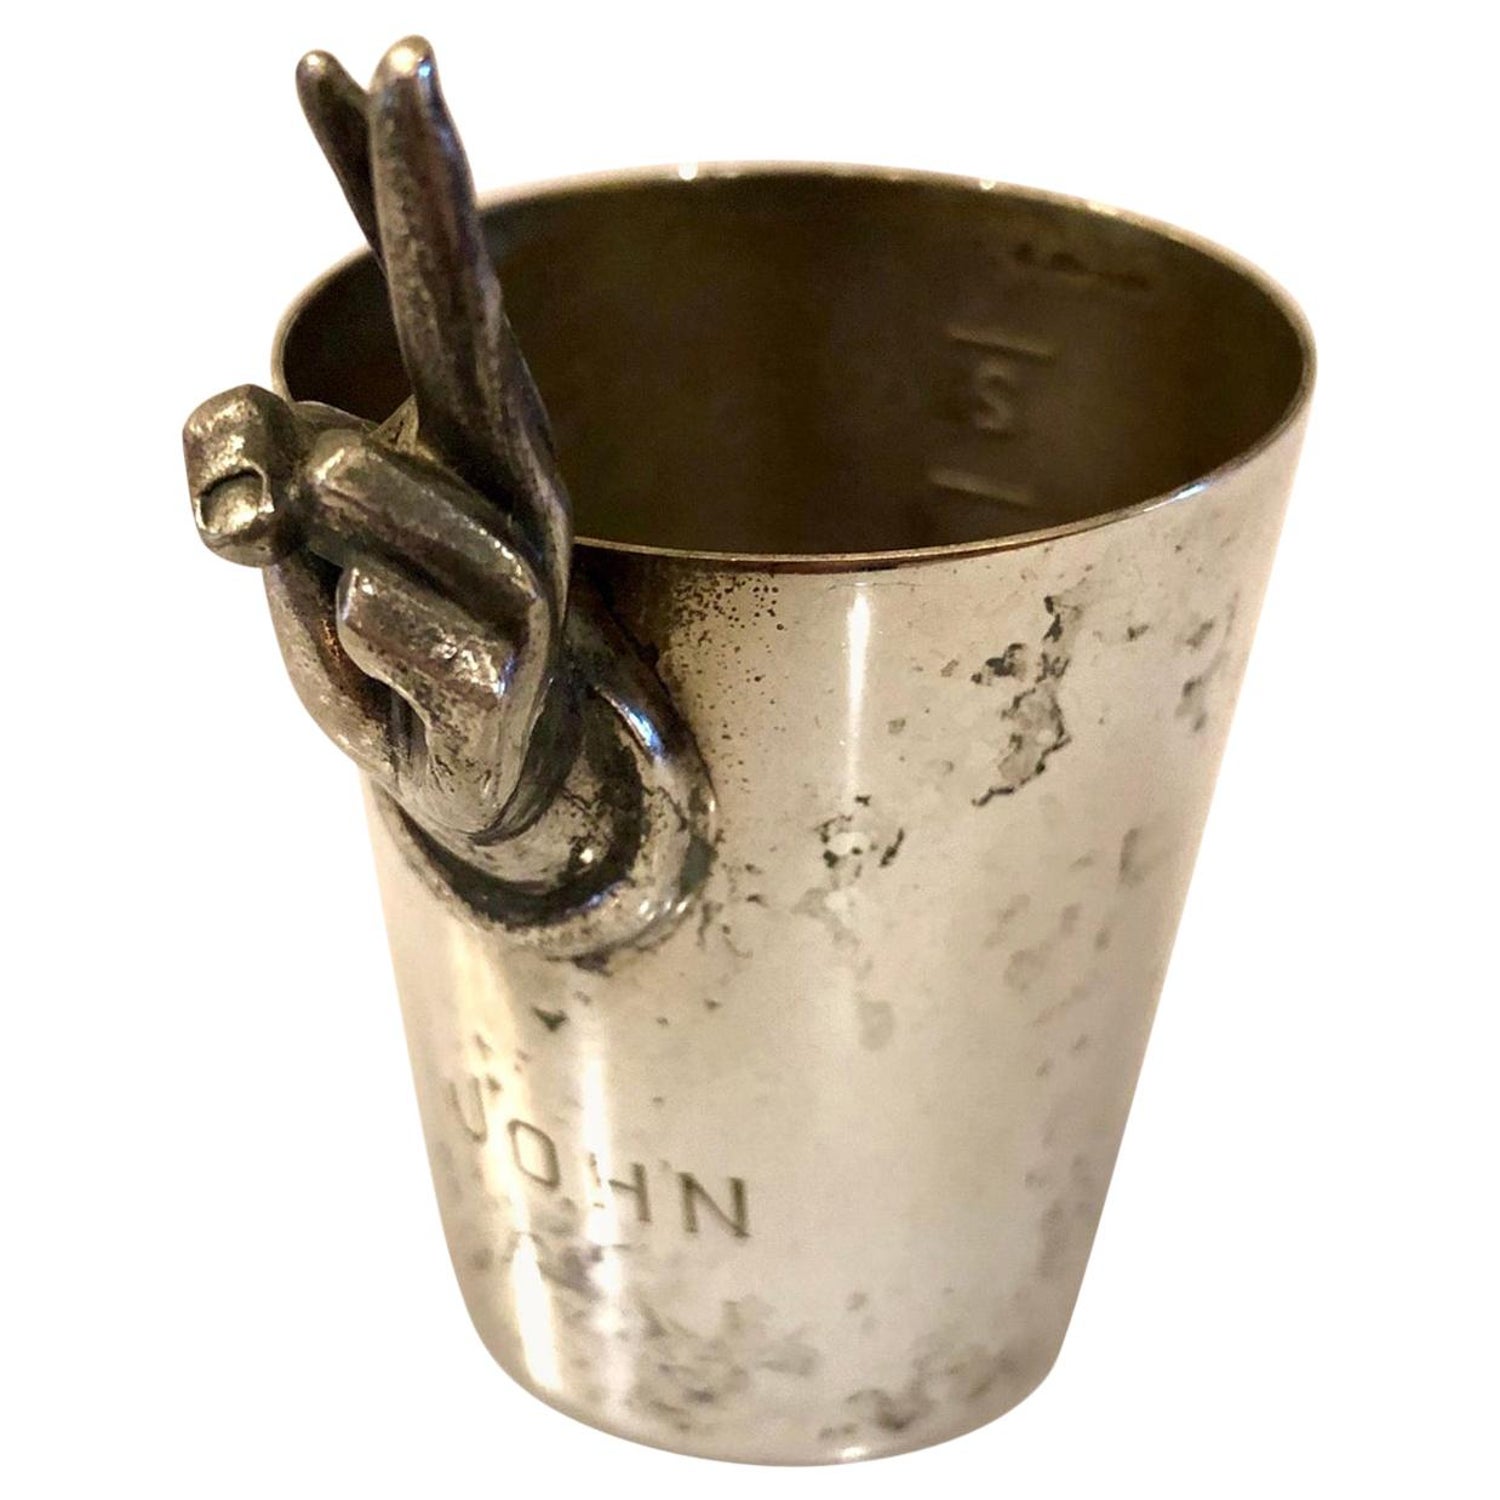 https://a.1stdibscdn.com/art-deco-silver-plate-shot-cup-with-peace-sign-for-sale/1121189/f_155443611565105971373/15544361_master.jpeg?width=1500